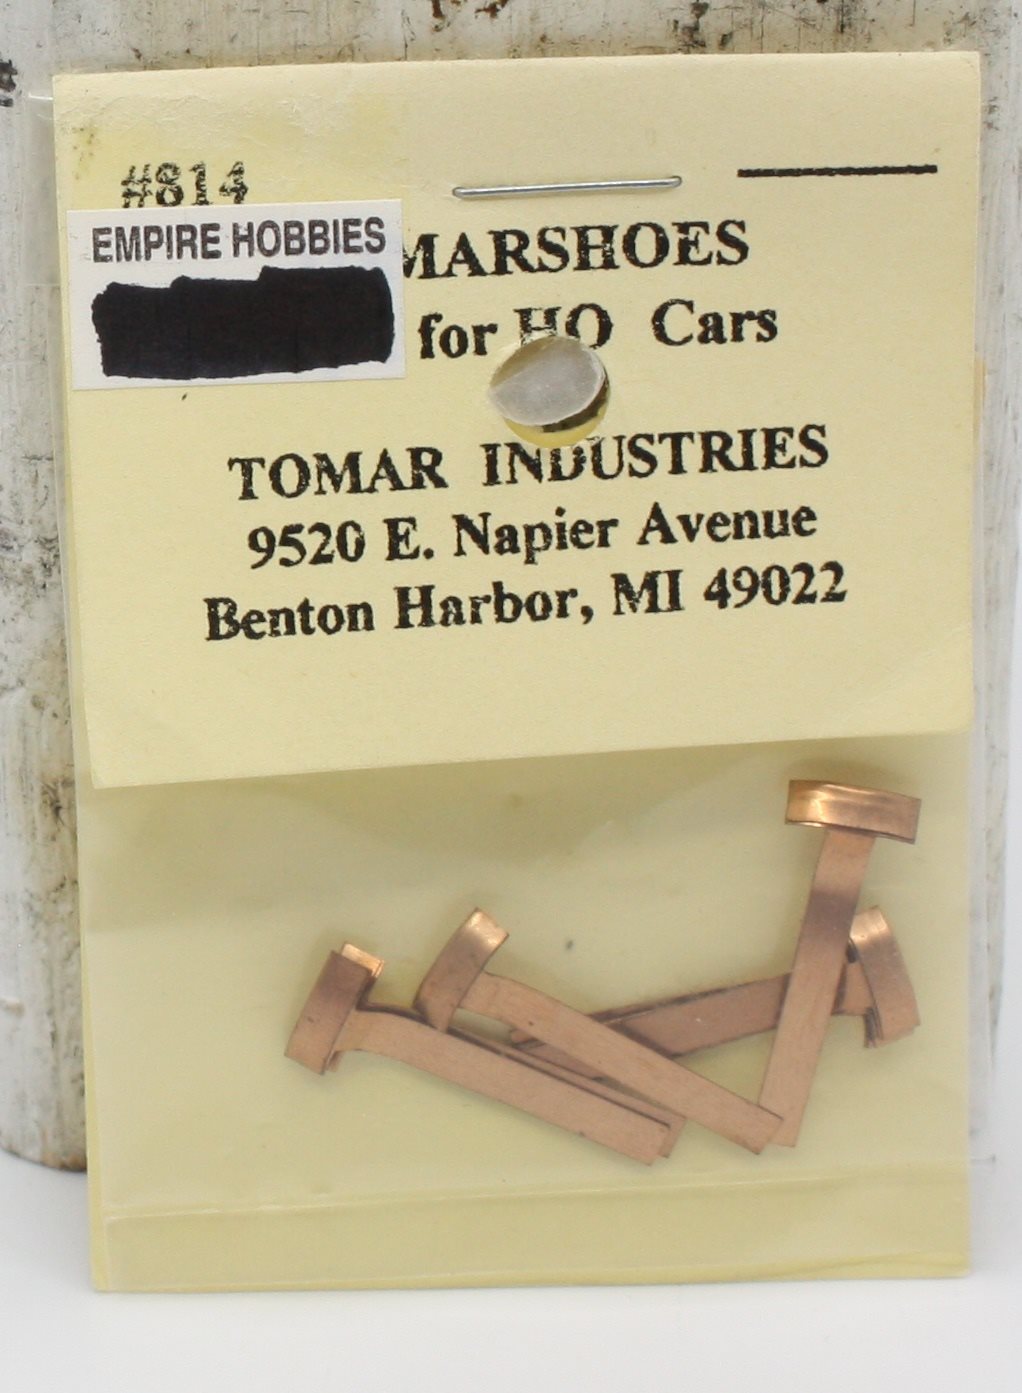 Tomar Industries 814 HO Tomarshoes for HO Cars